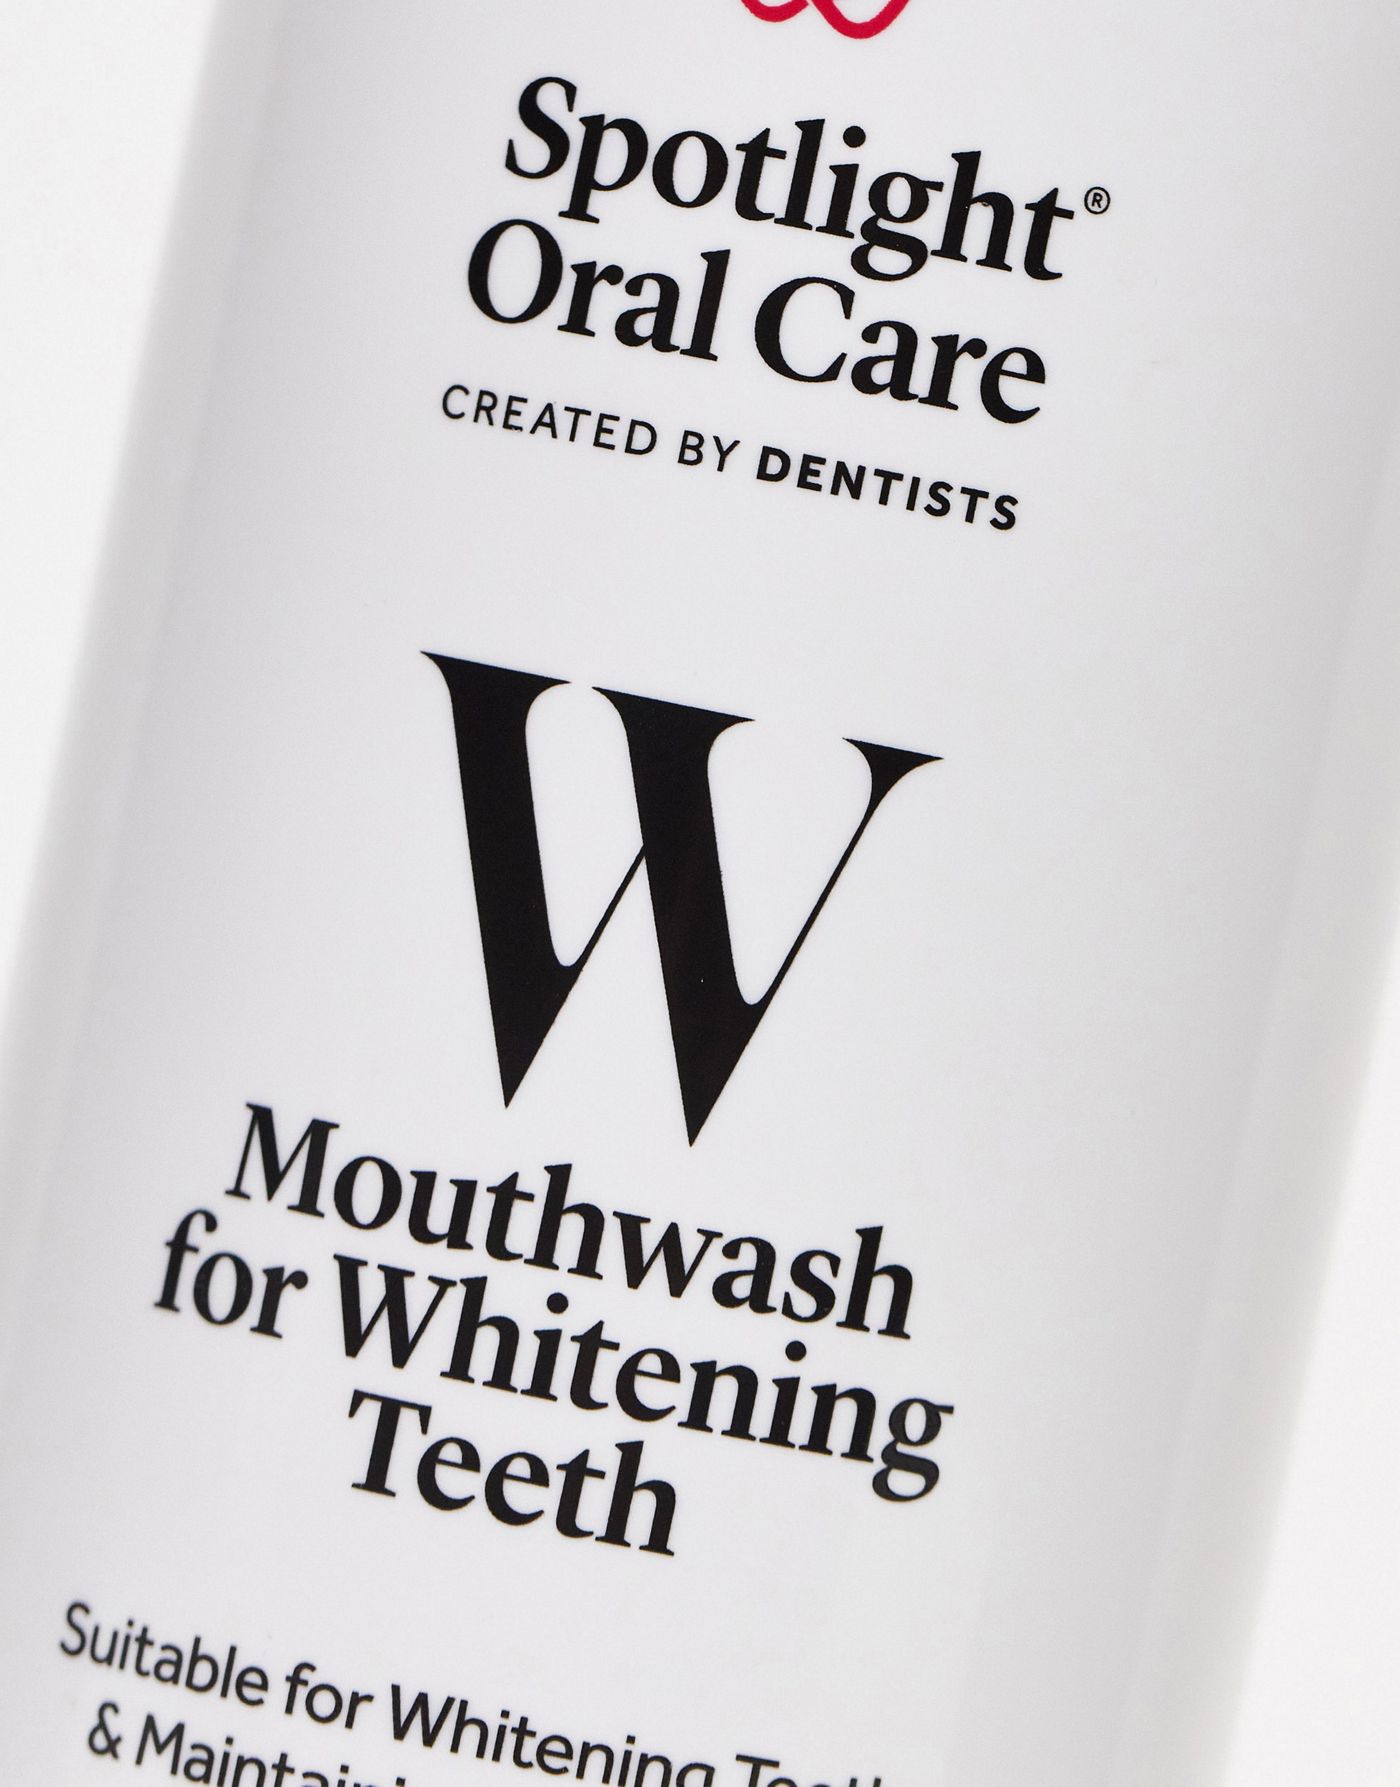 Spotlight Oral Care Teeth Mouthwash for Whitening Teeth